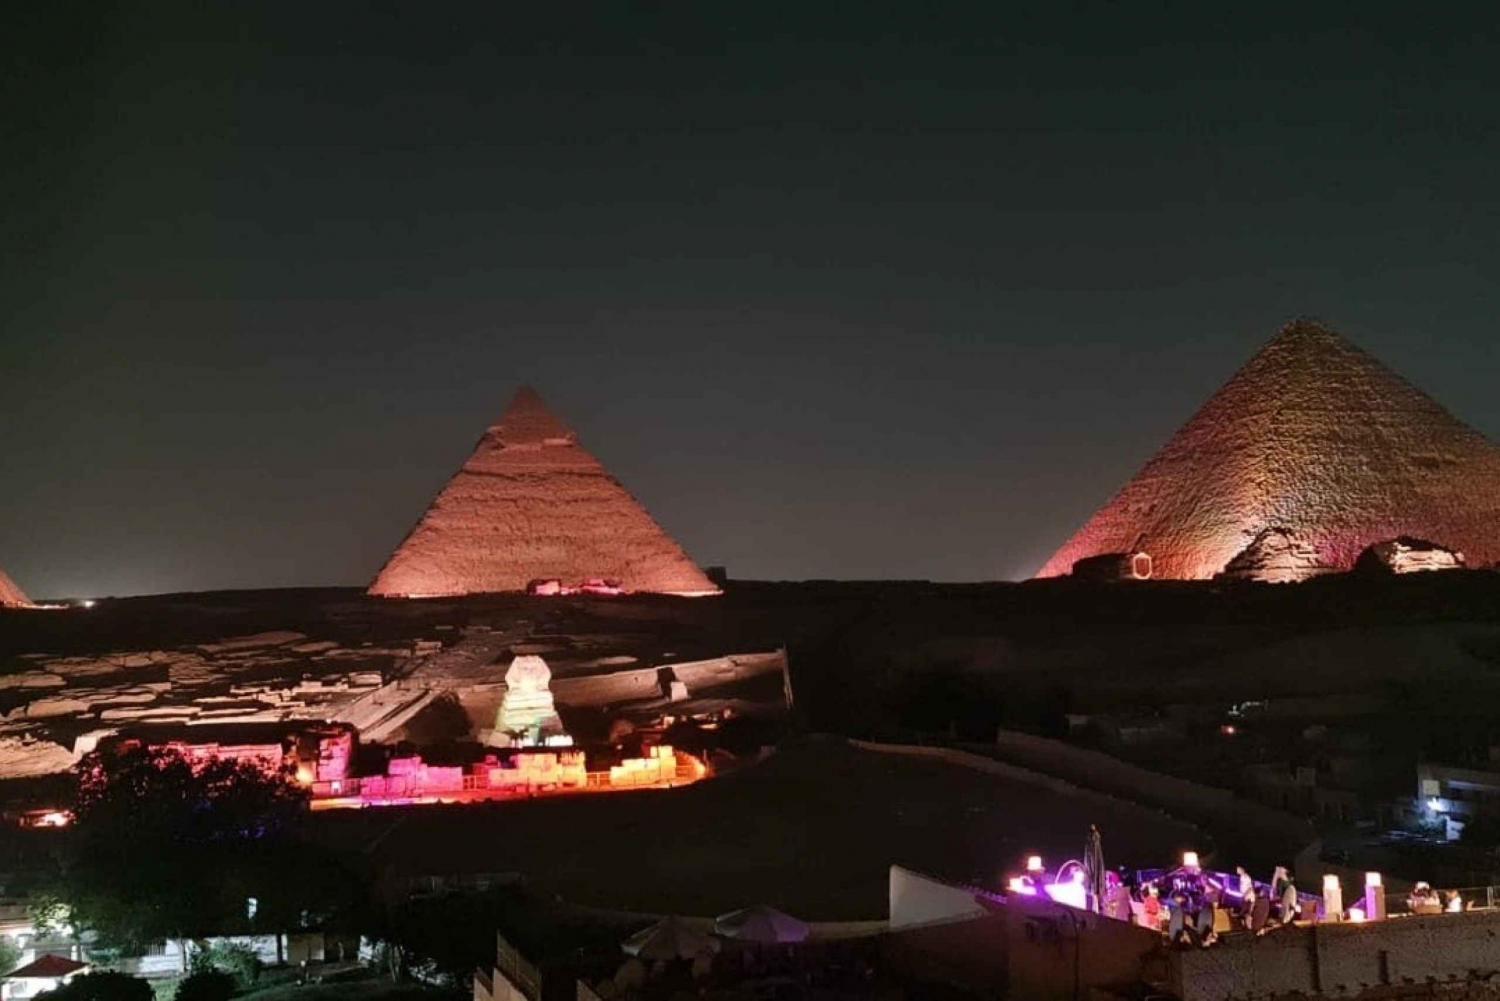 Cairo: Sound and Light Show at Giza Pyramids with Transfers